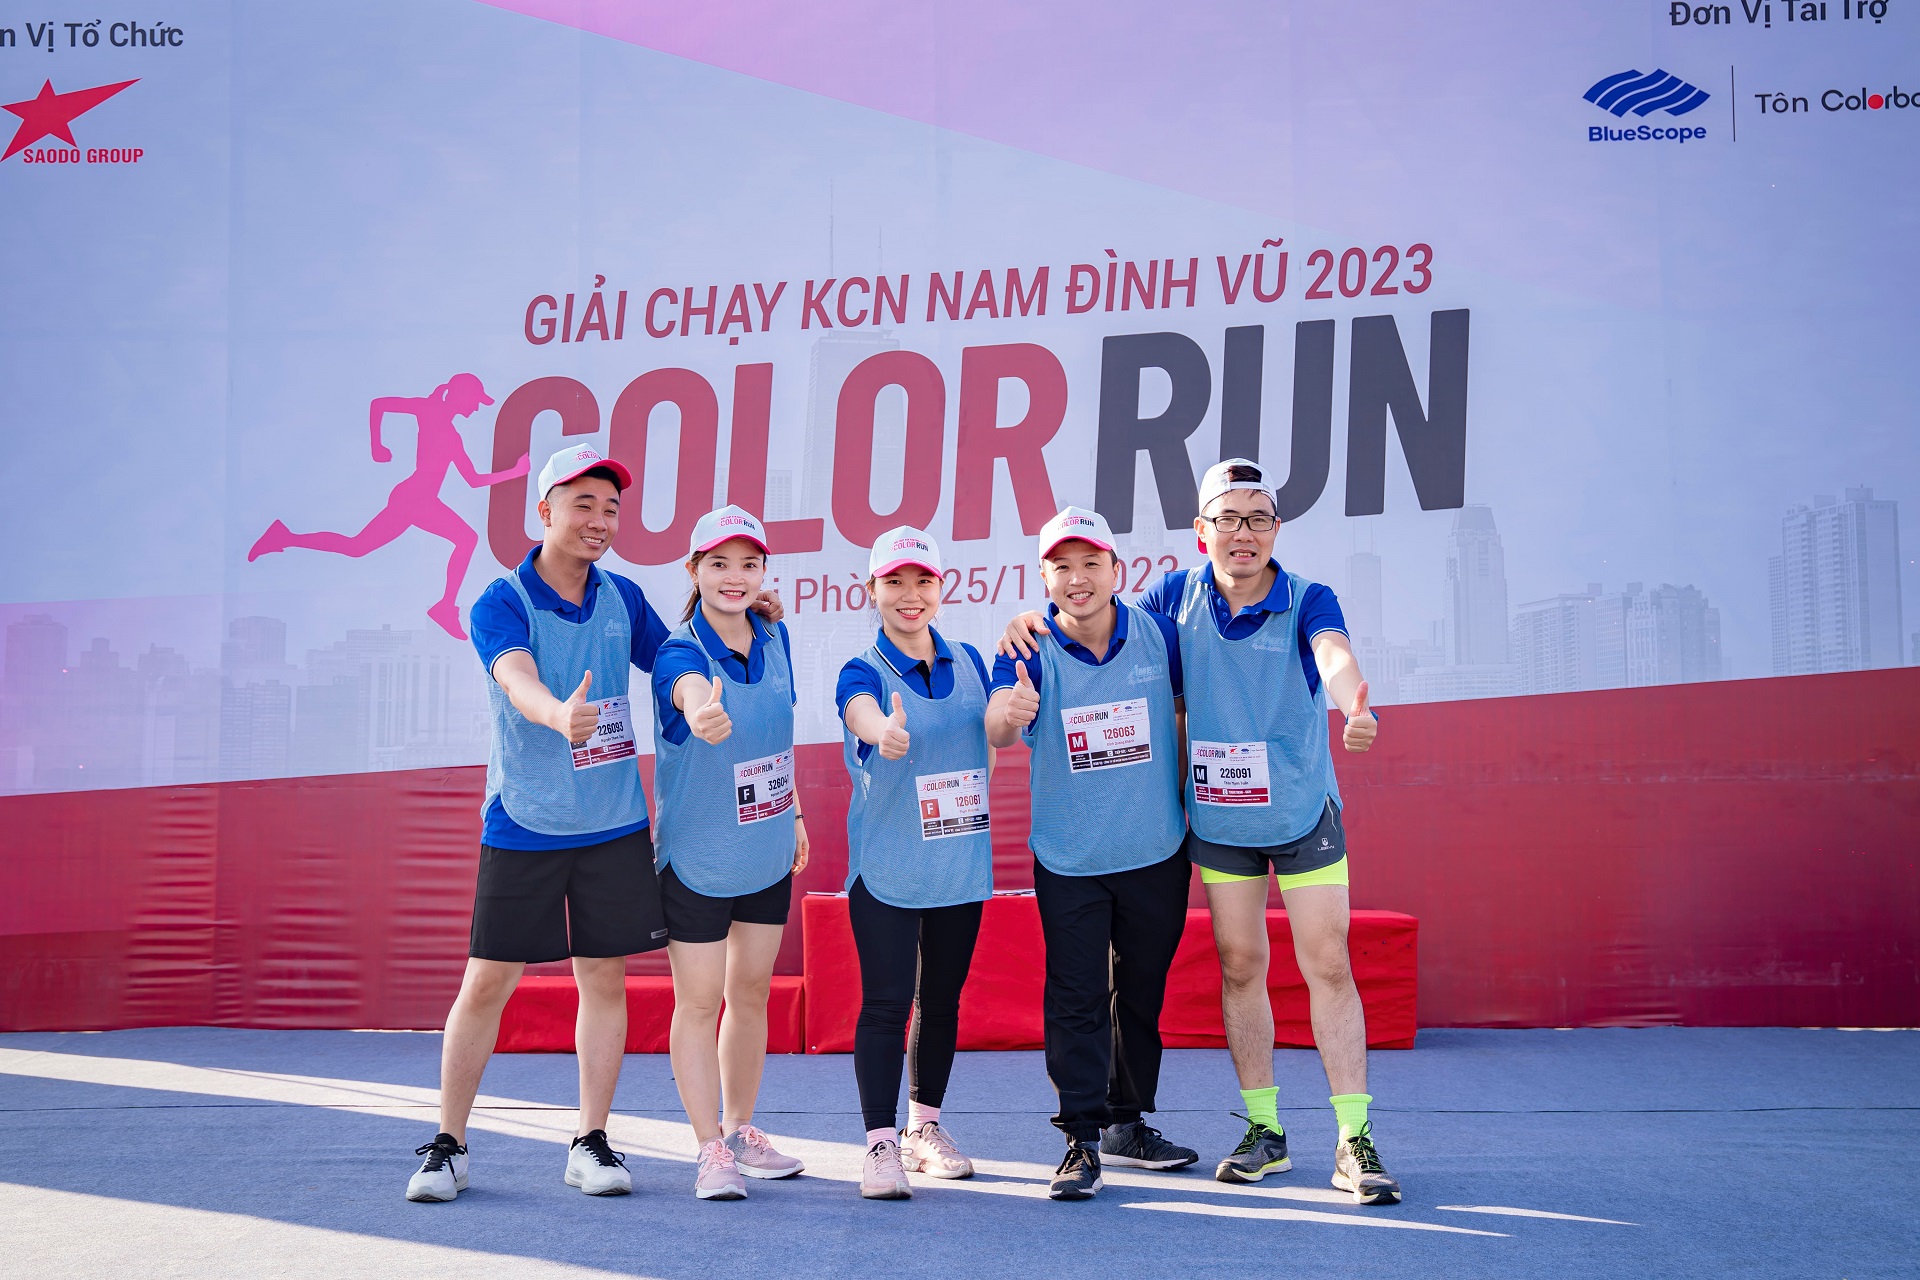 Amecc participates in the Color Run 2023 event - Exploring abilities and networking at Nam Đình Vũ Industrial Park